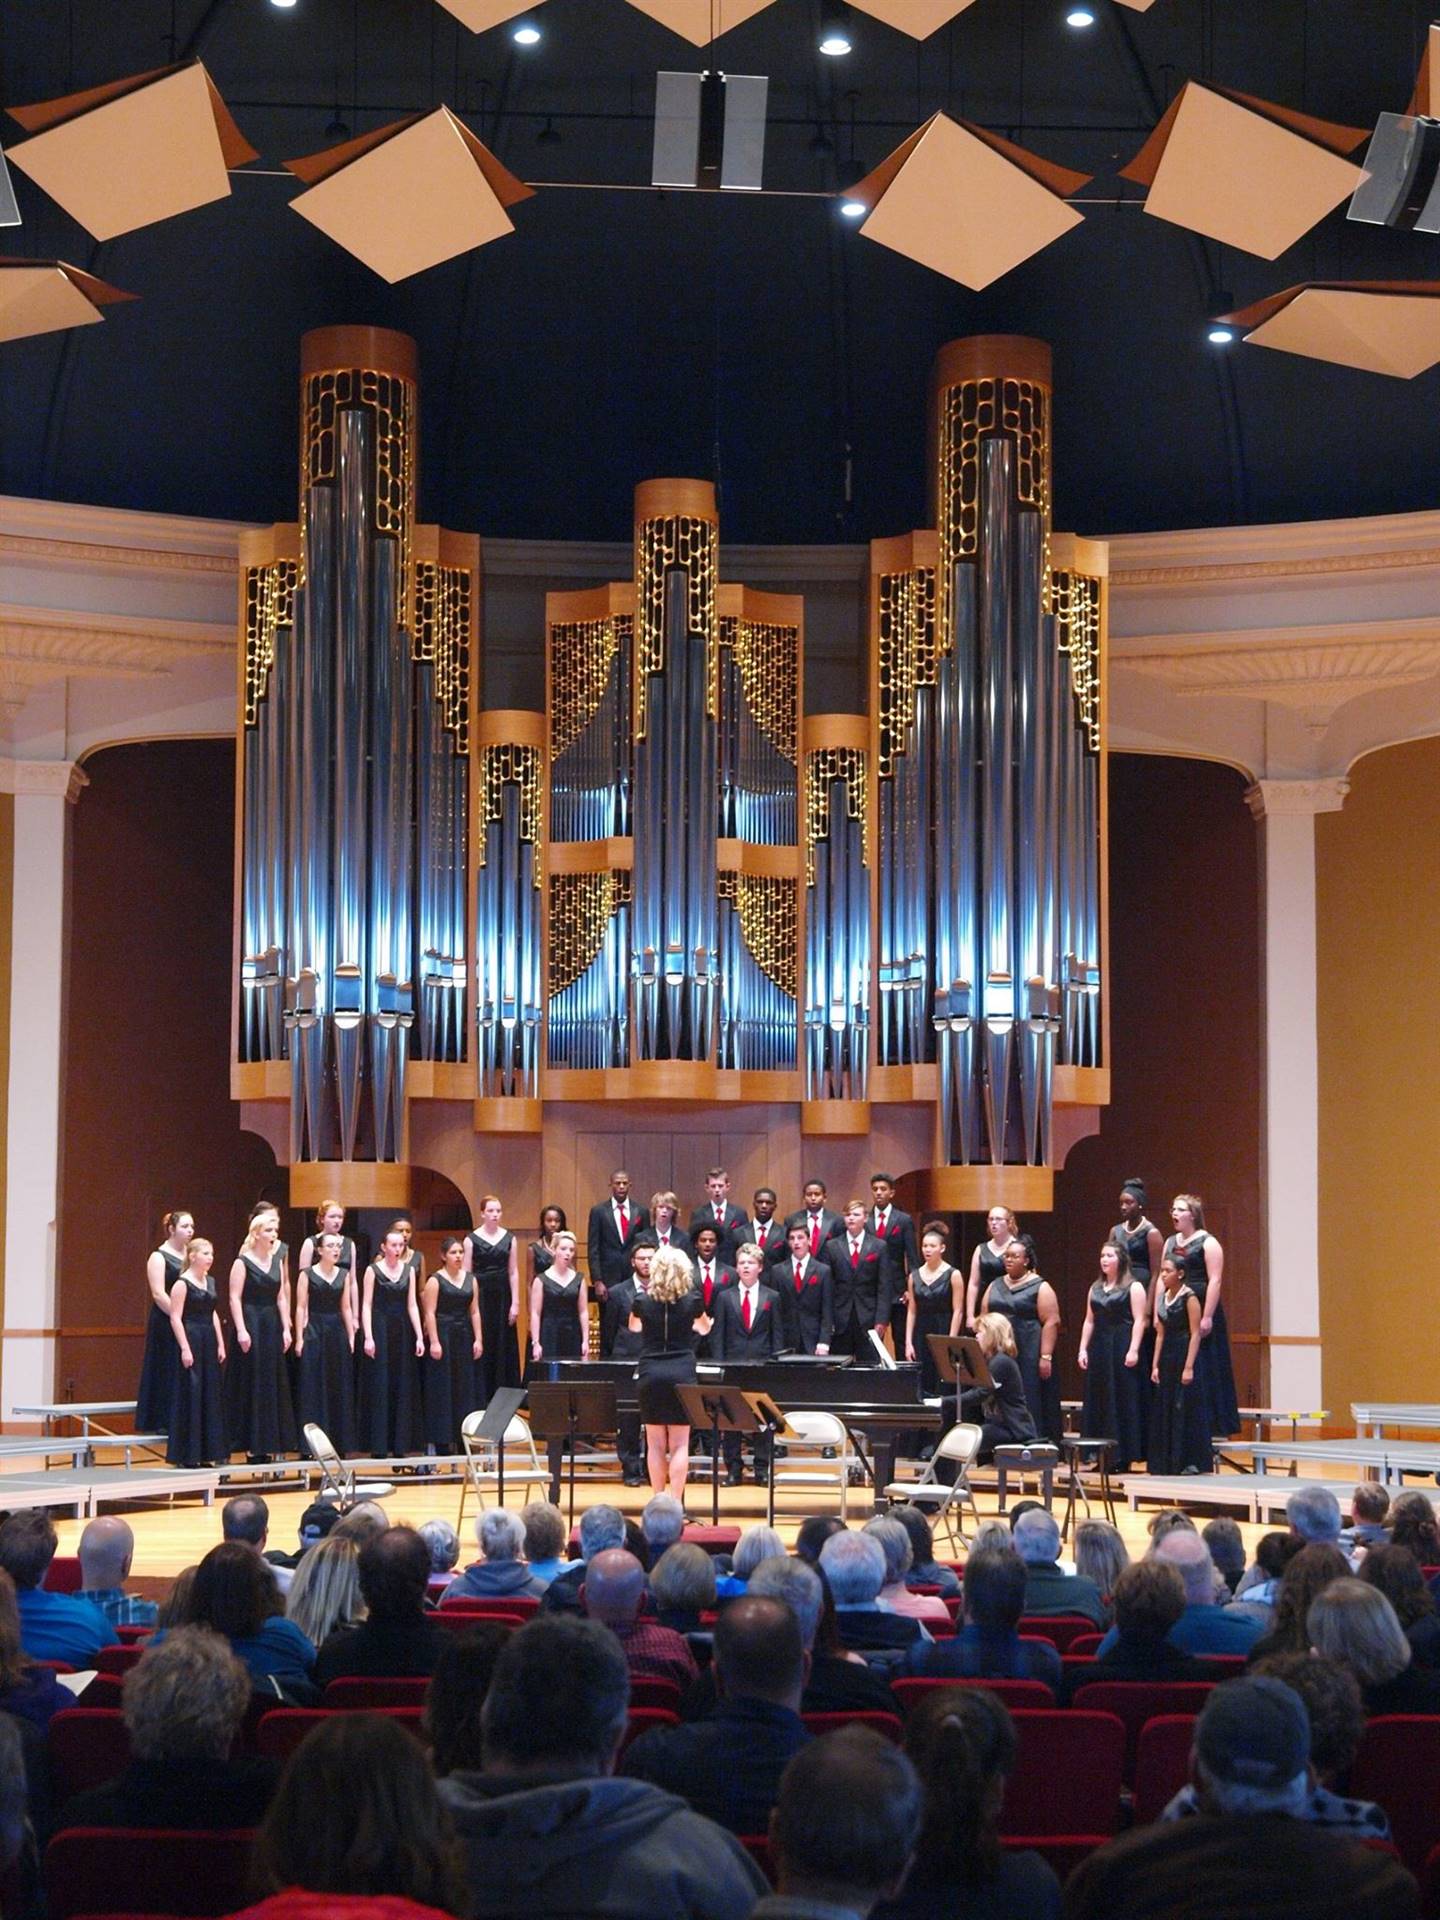 Yearling Singers & Bella Voce participated in the Ohio Wesleyan University High School Choral Festiv